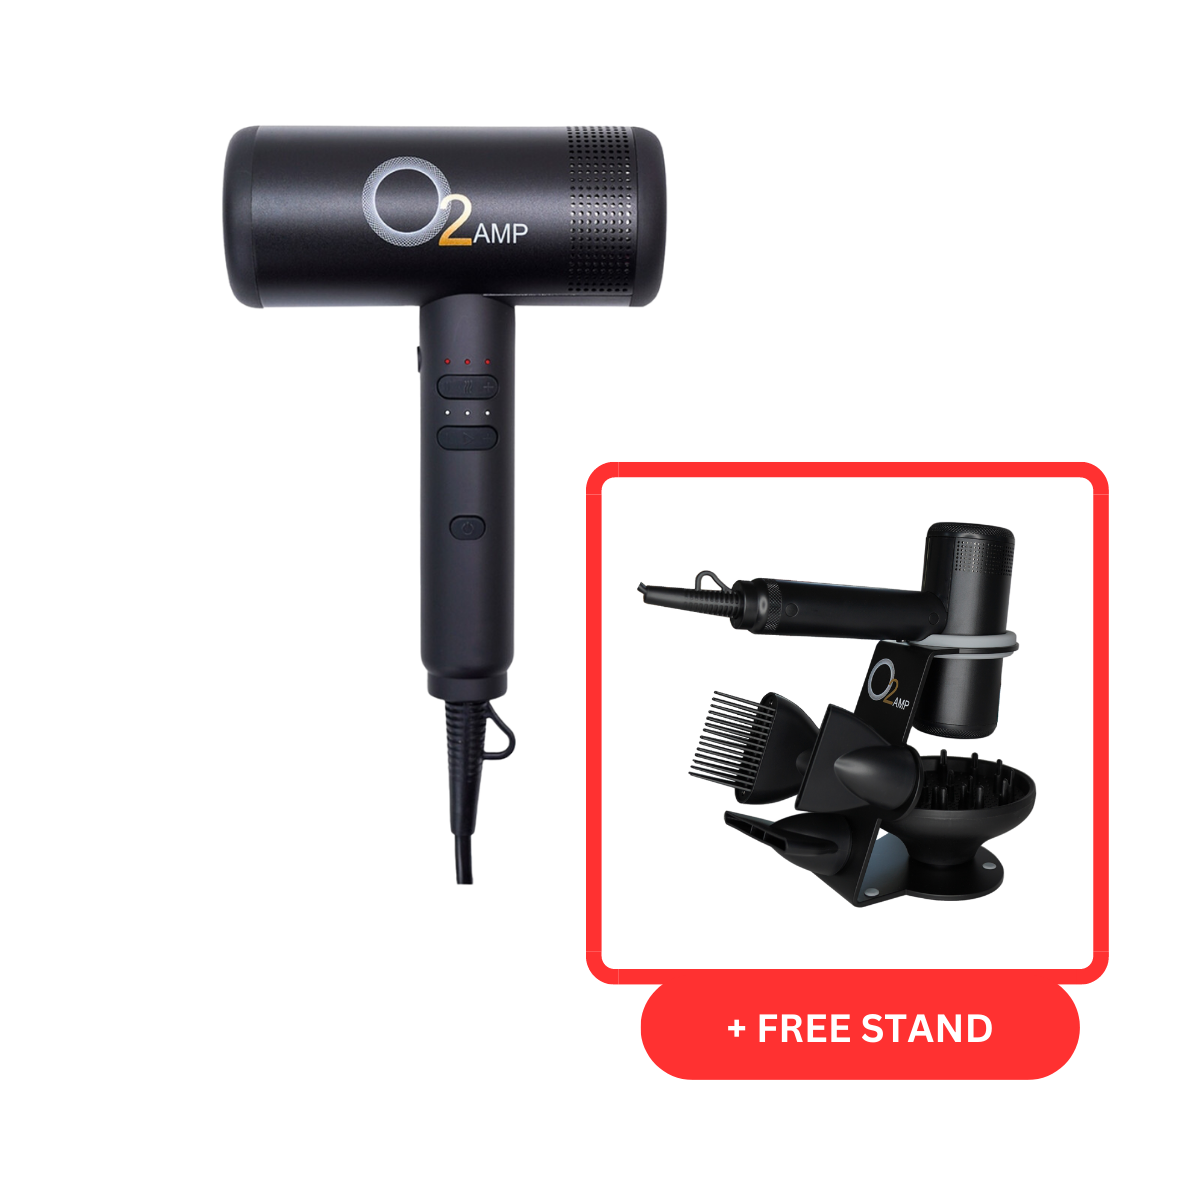 O2 AMP Hypersonic Hair Dryer + FREE AMP Professional Dryer Stand